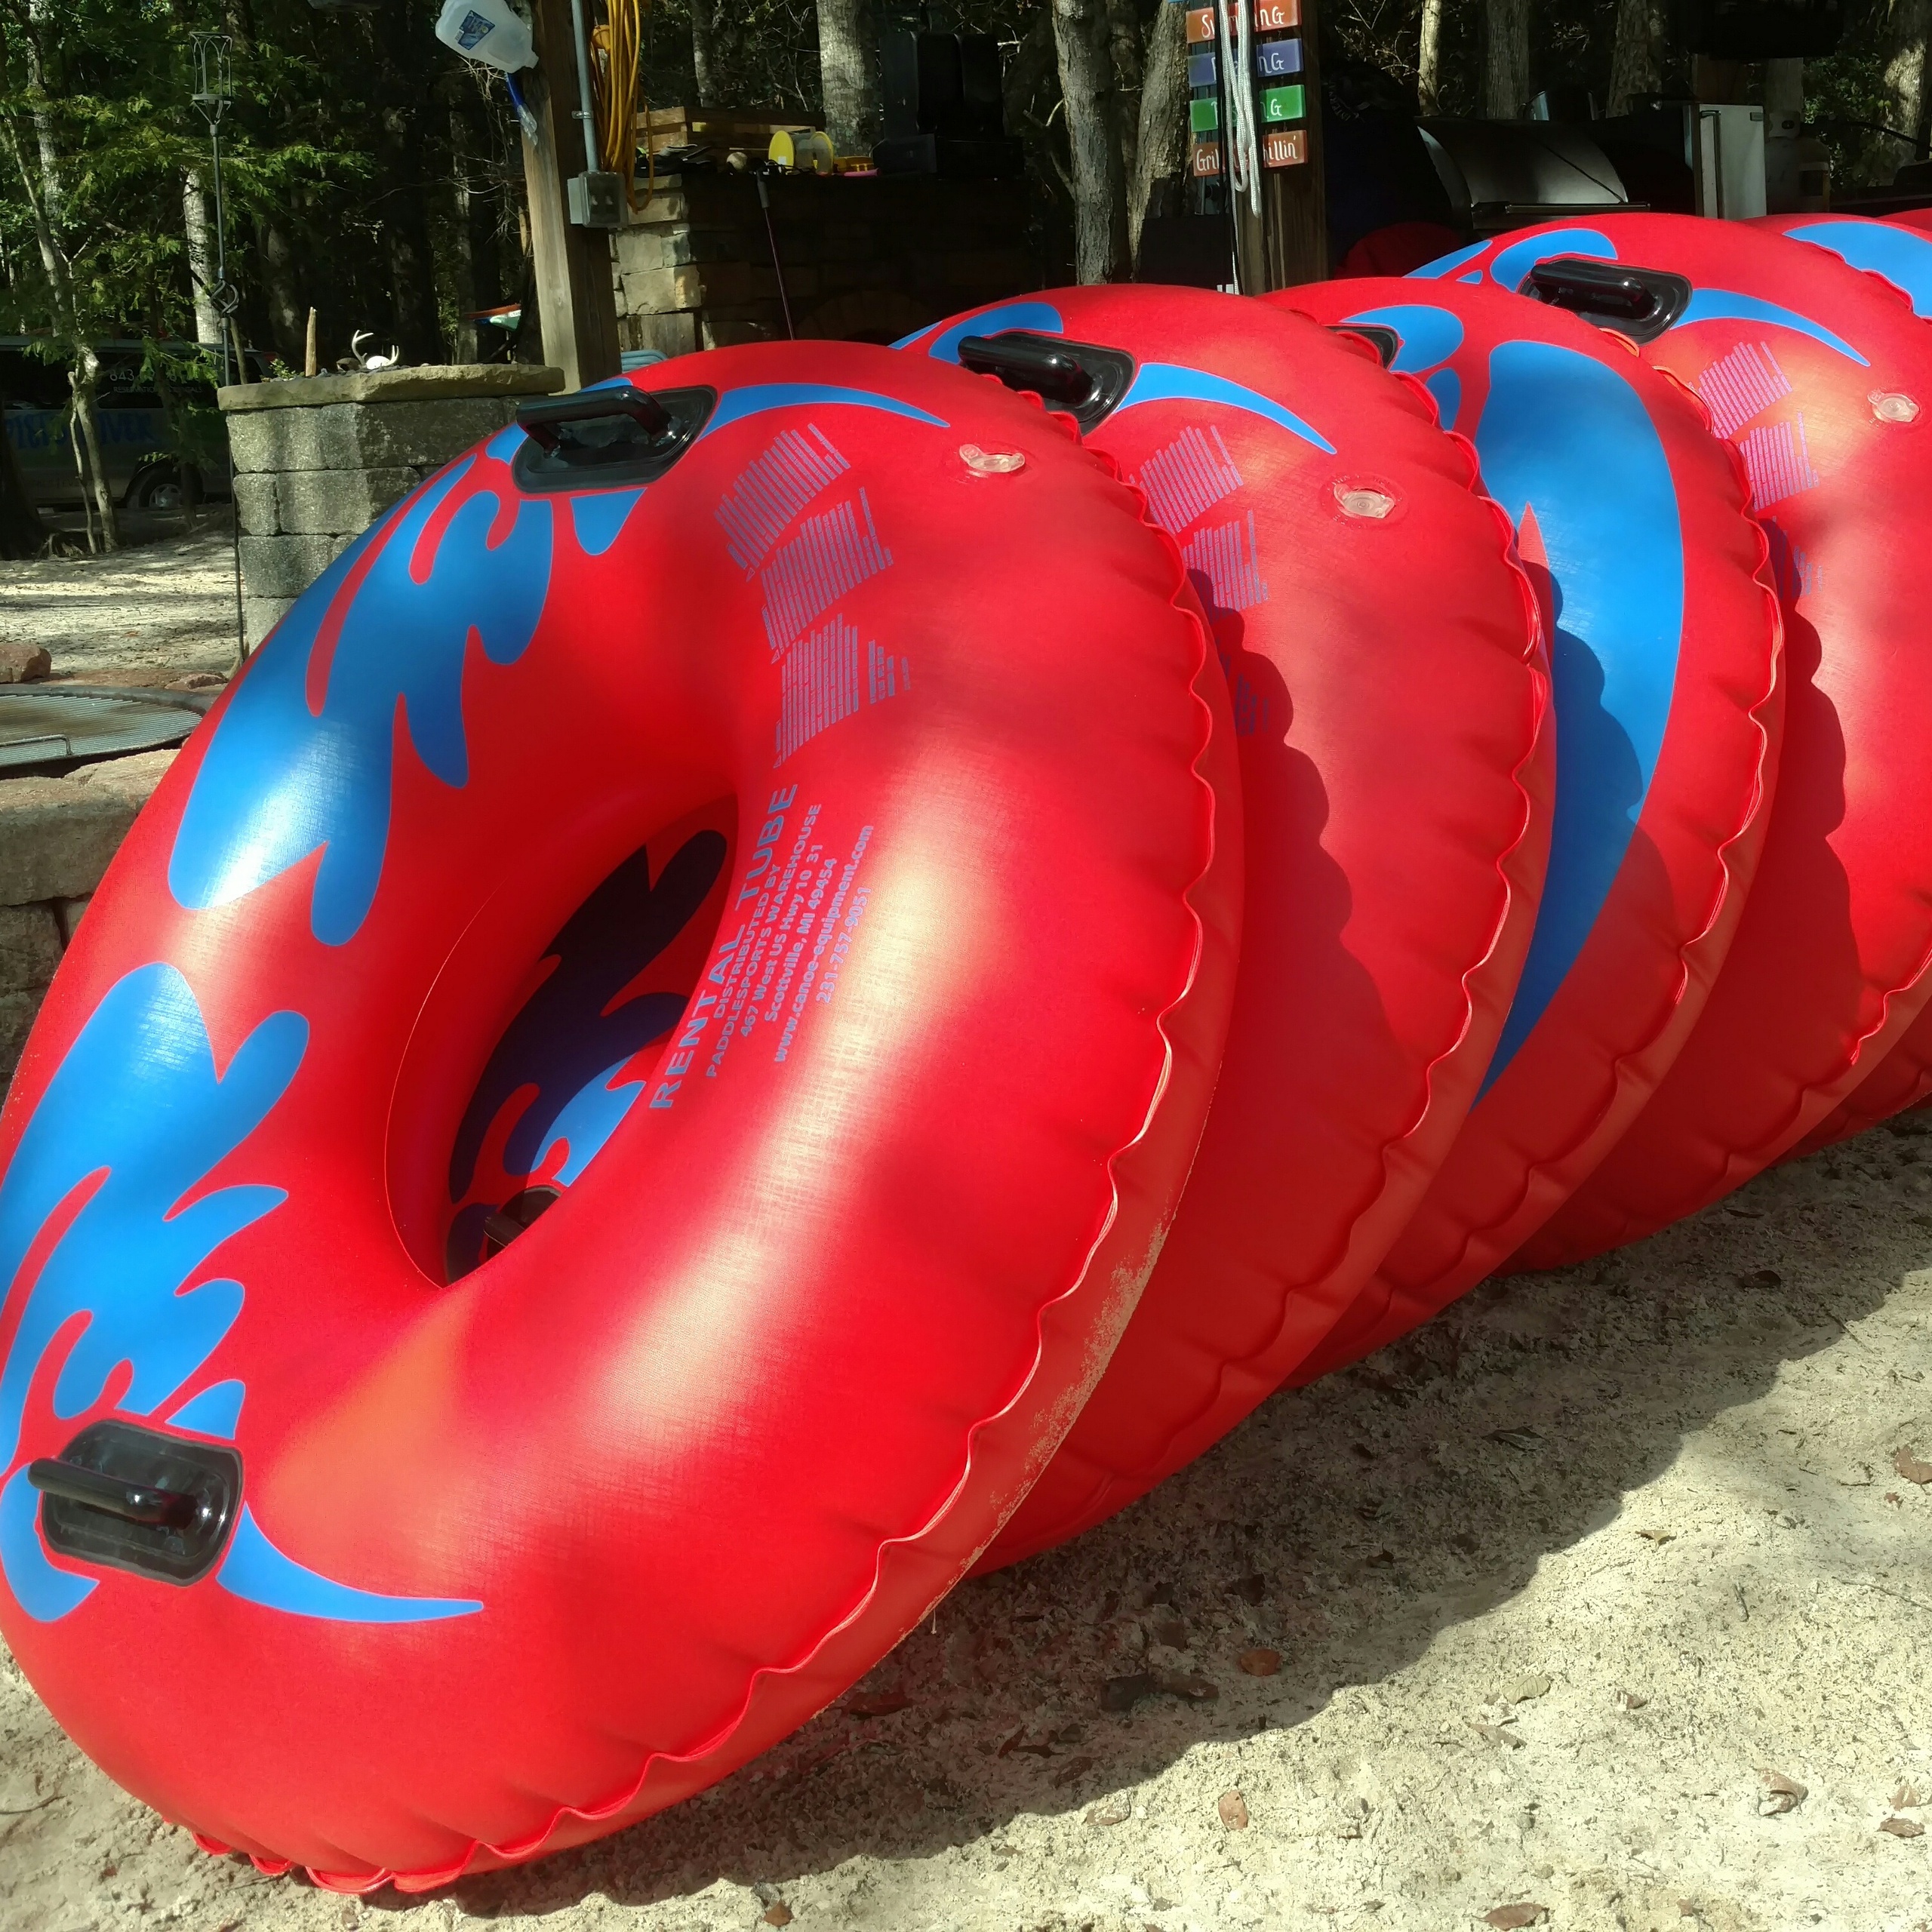 River Tubing & Private BYOB Beach Party with Tubes, Return Shuttle, Coolers, Games and More image 12